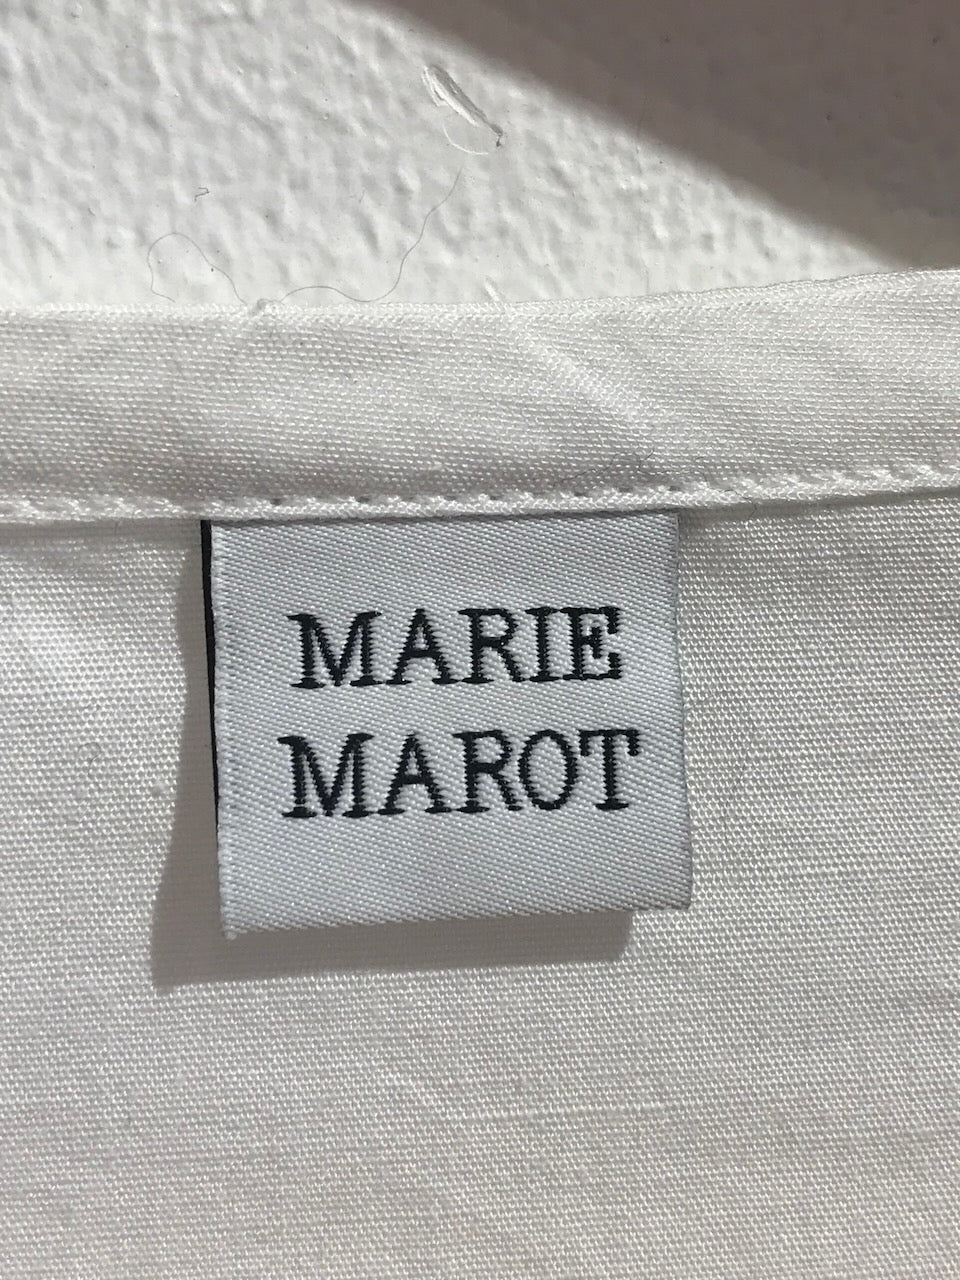 Chemise Marie Marot blanche T.M